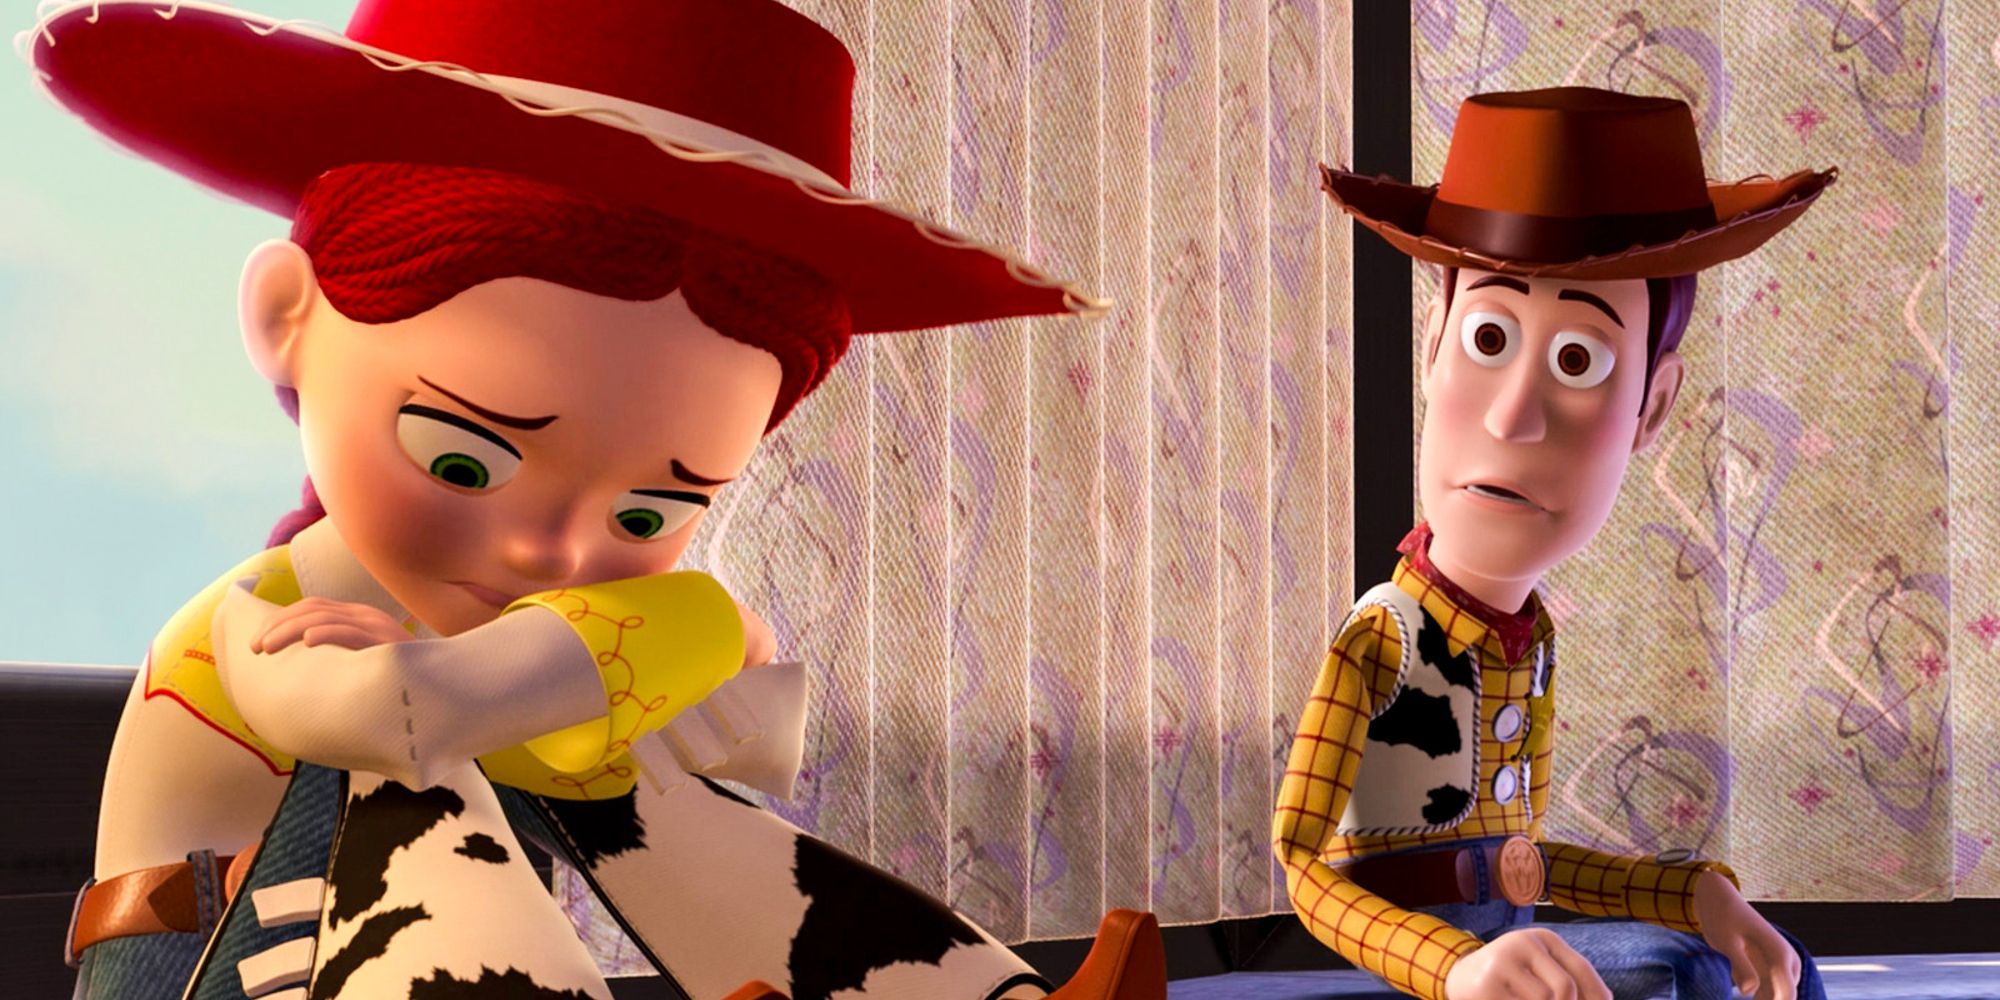 Jessie’s “Abraham Lincoln” Toy Story 2 Line Has A Weird Hidden Meaning